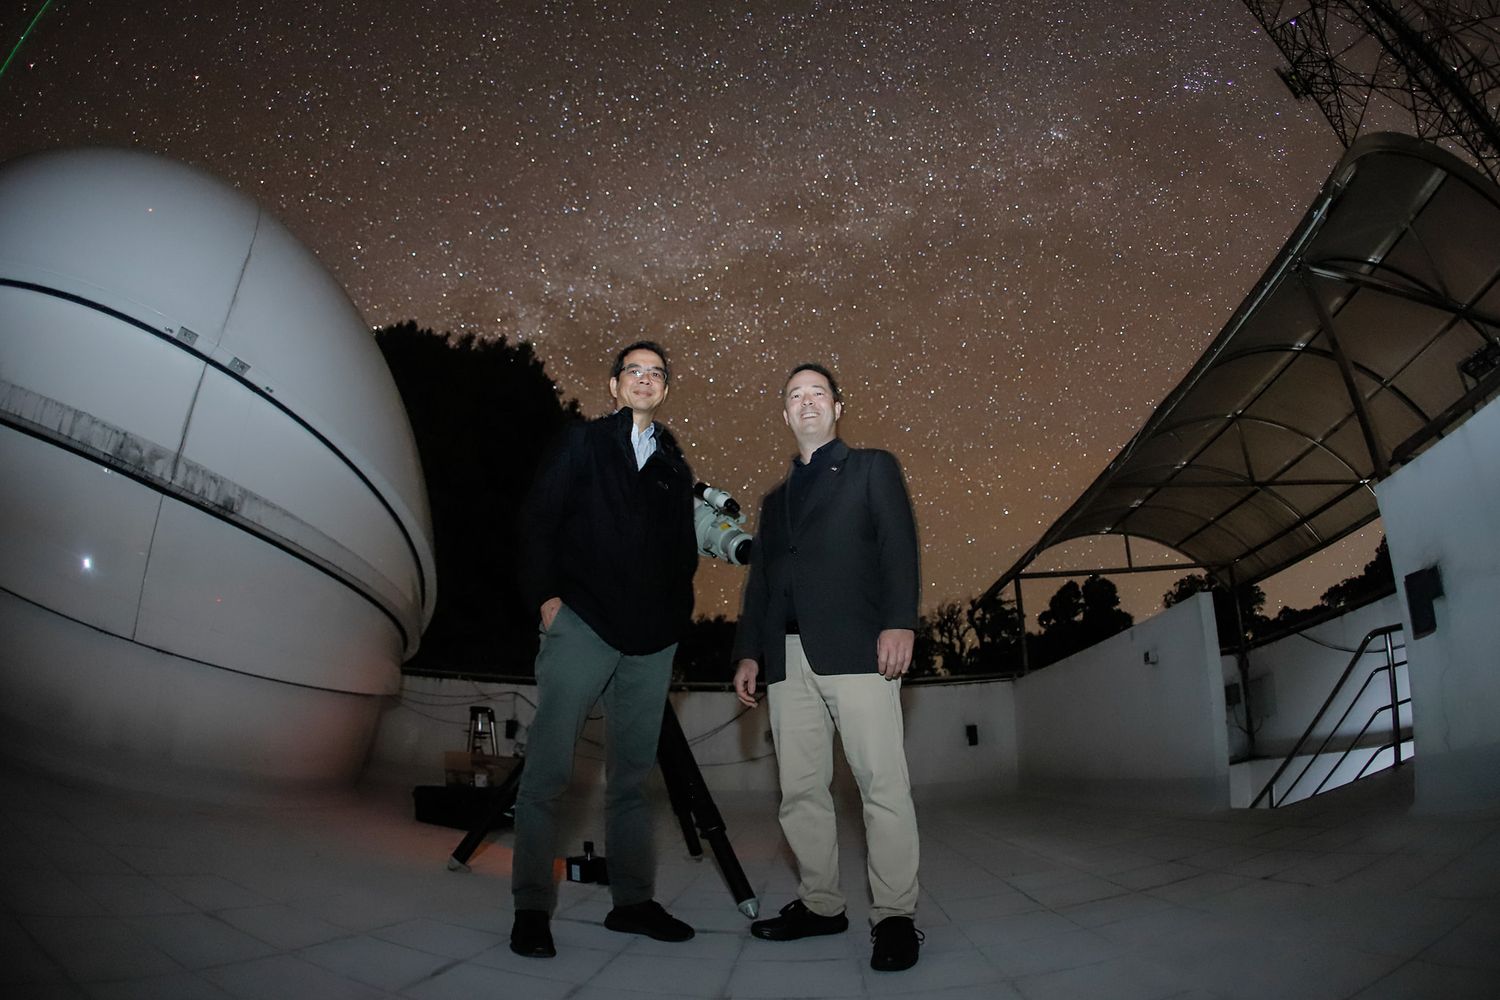 Thai - U.S. Astronomical Collaborations strengthened through U.S Consulate General Chiang Mai